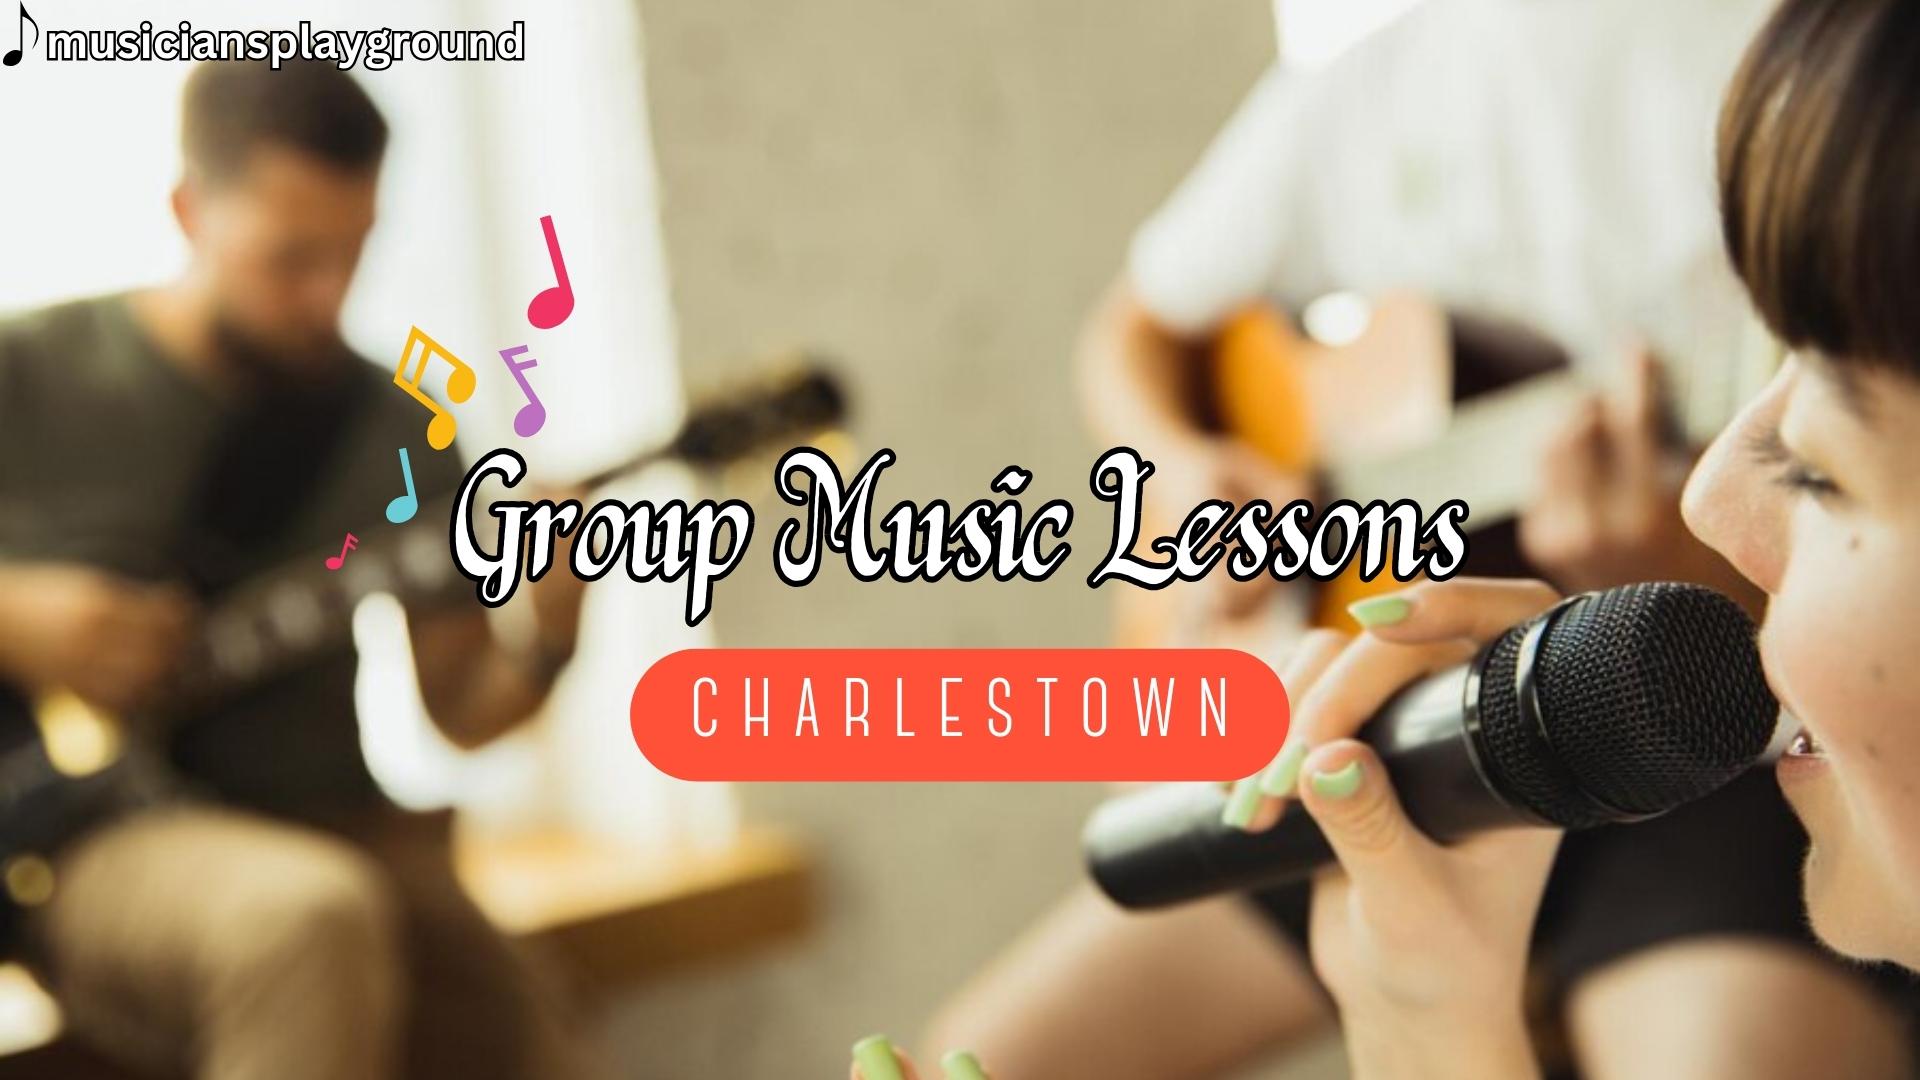 Group Music Lessons in Fenway, Massachusetts: Collaborative Music Learning at Musicians Playground